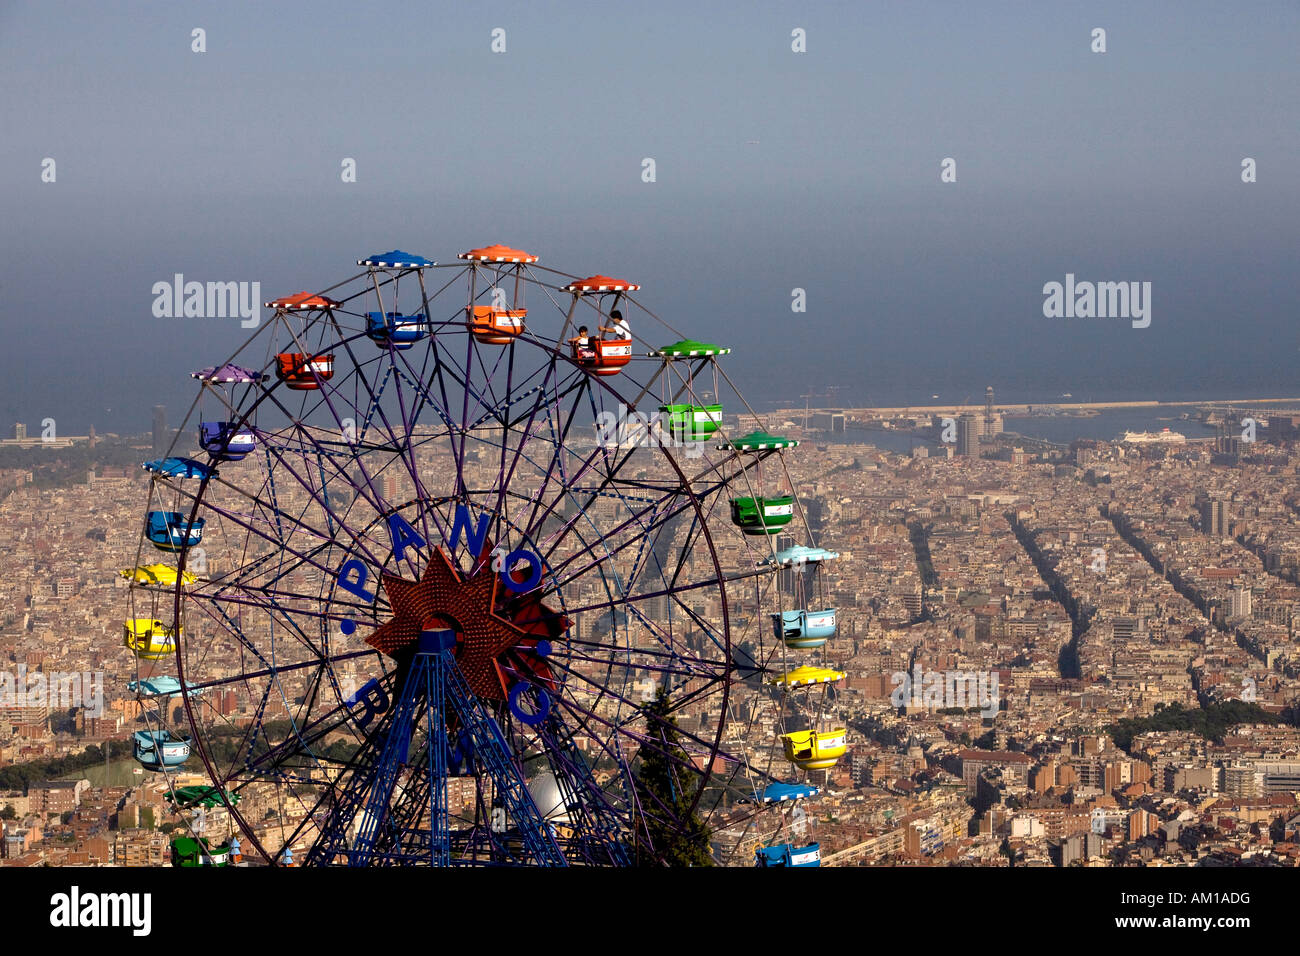 View over the theme park Tibidabo with a big wheel and the city of Barcelona, Catalonia, Spain Stock Photo